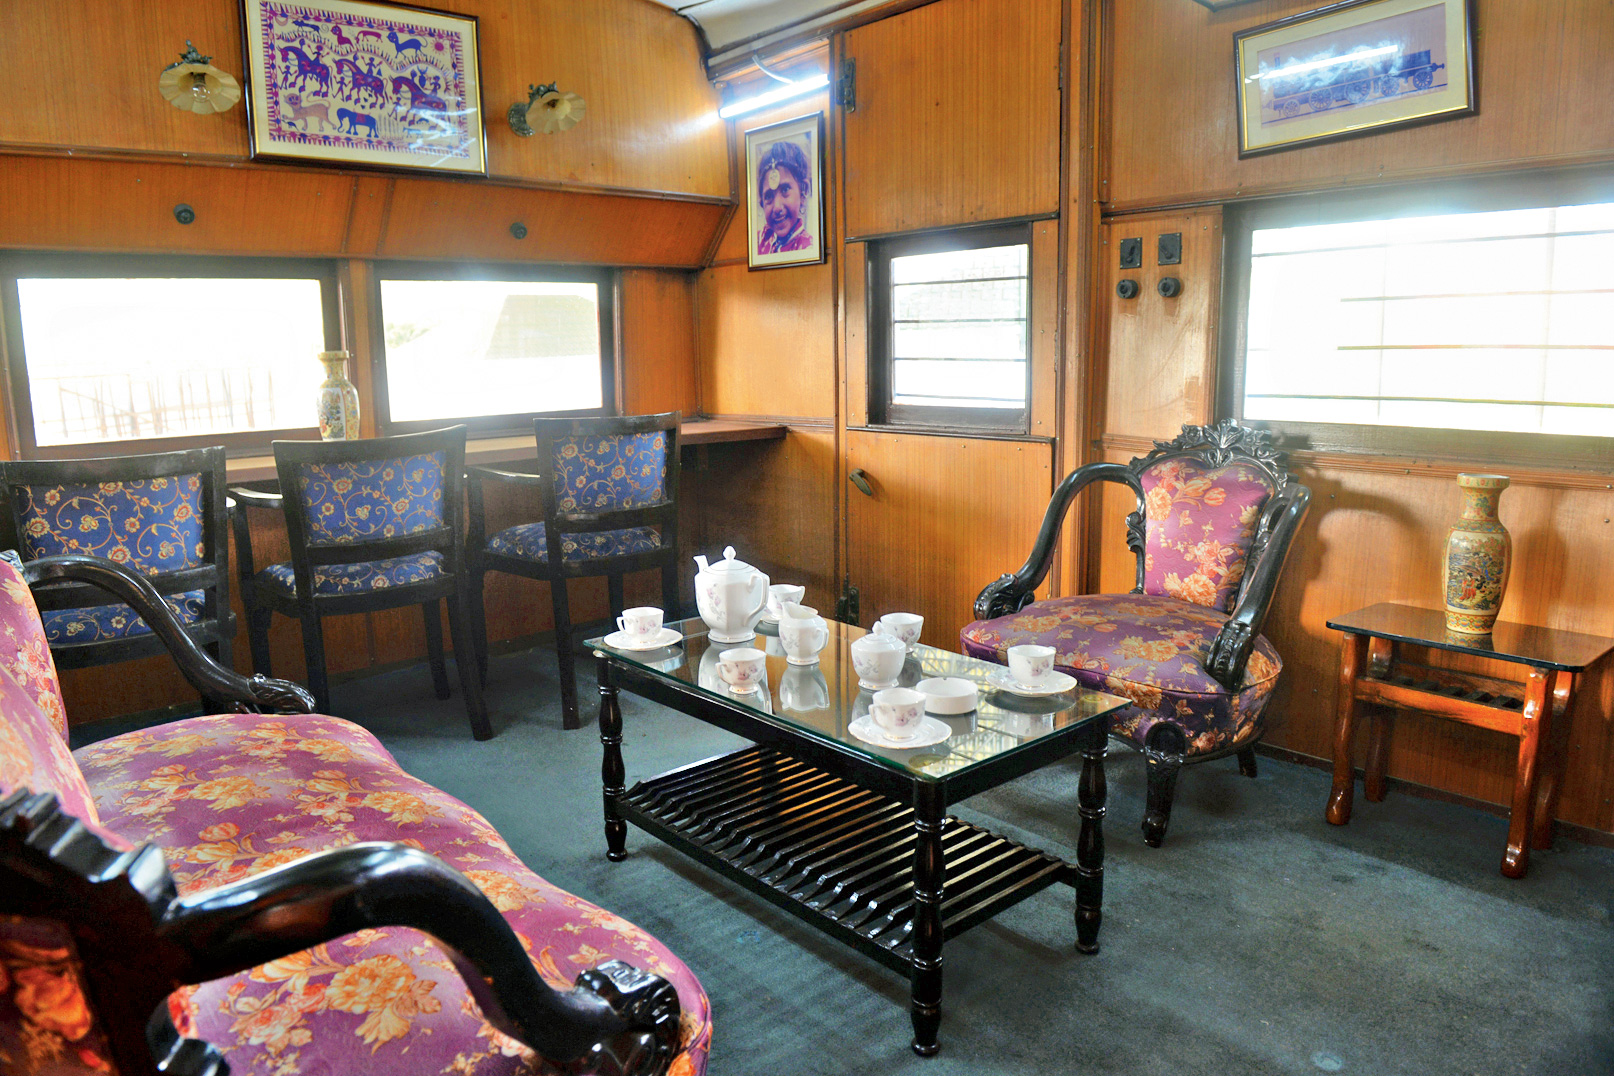 The lavish interiors of a metre-gauge inspection carriage at the Rail Museum in Howrah.